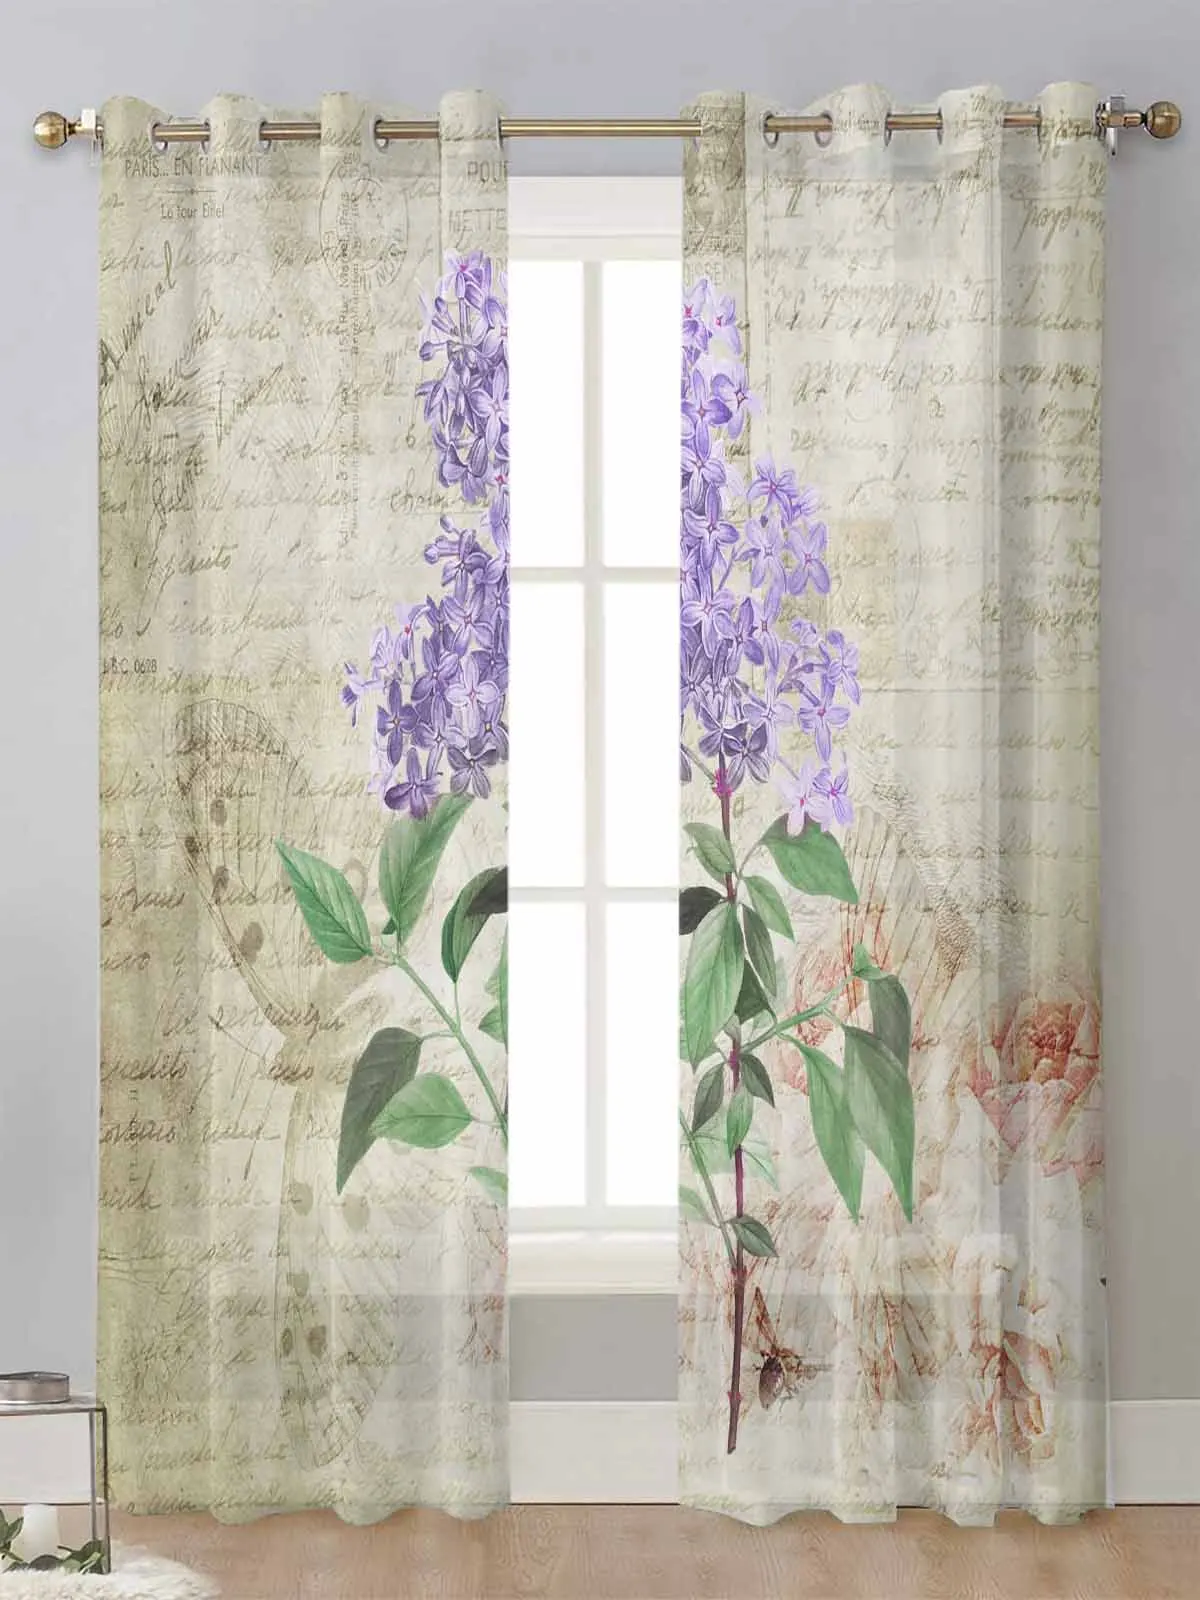 

Vintage Plant Lavender Purple Flower Sheer Curtains For Living Room Window Voile Tulle Curtain Cortinas Drapes Home Decor